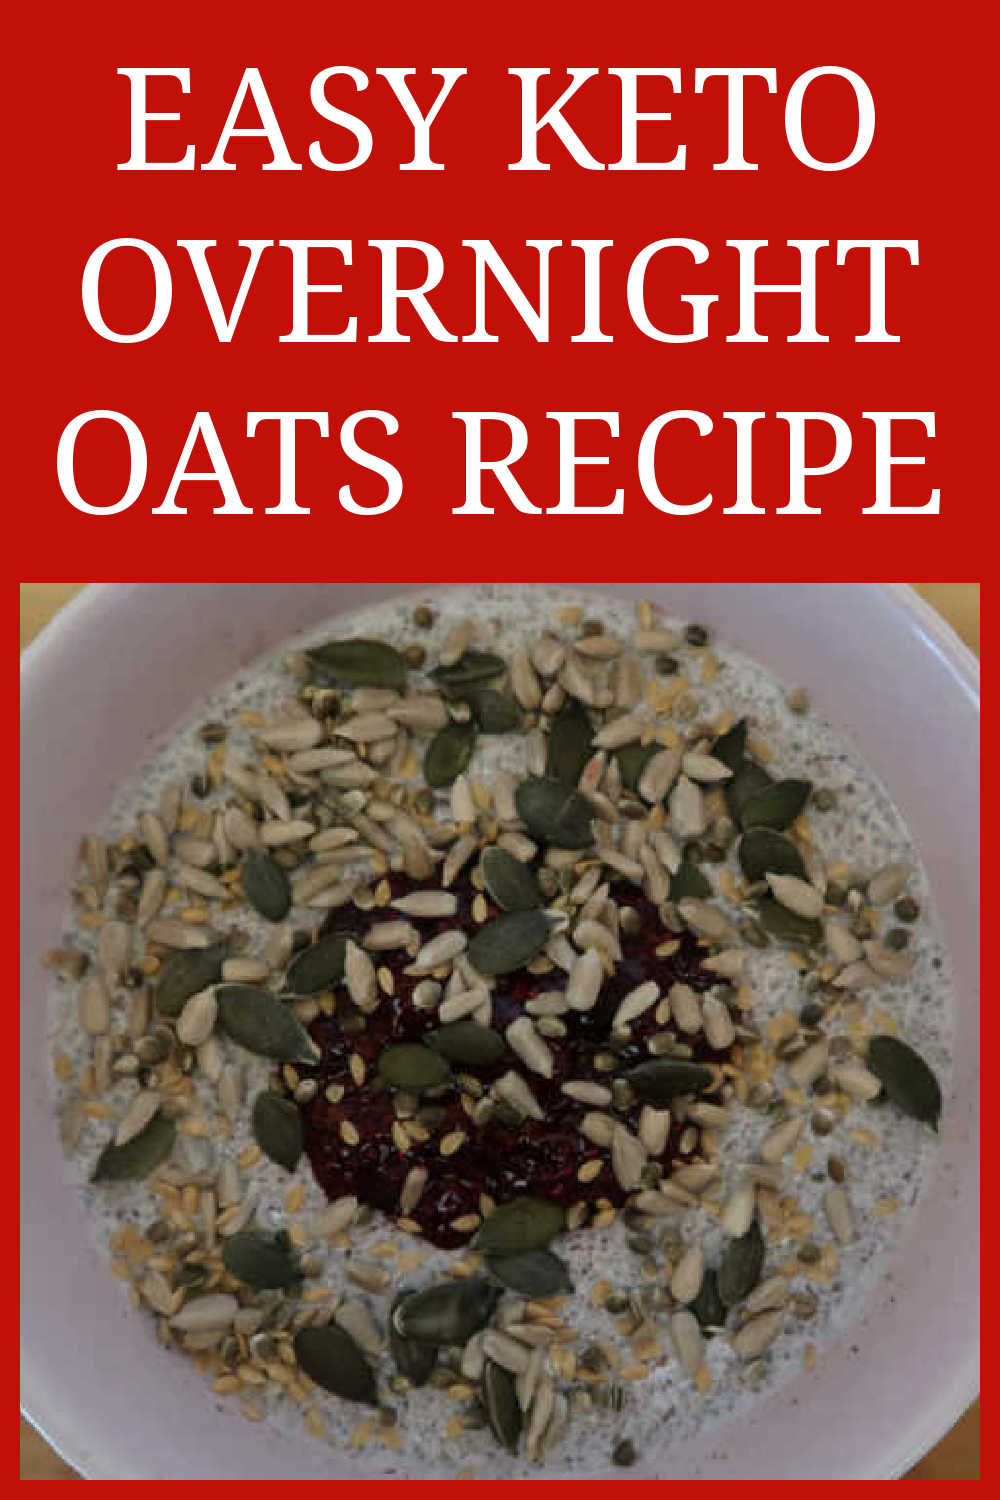 Keto Overnight Oats Recipe - How to make easy low carb friendly oatmeal substitute for breakfast with chia seeds and Greek yogurt - with the video tutorial.